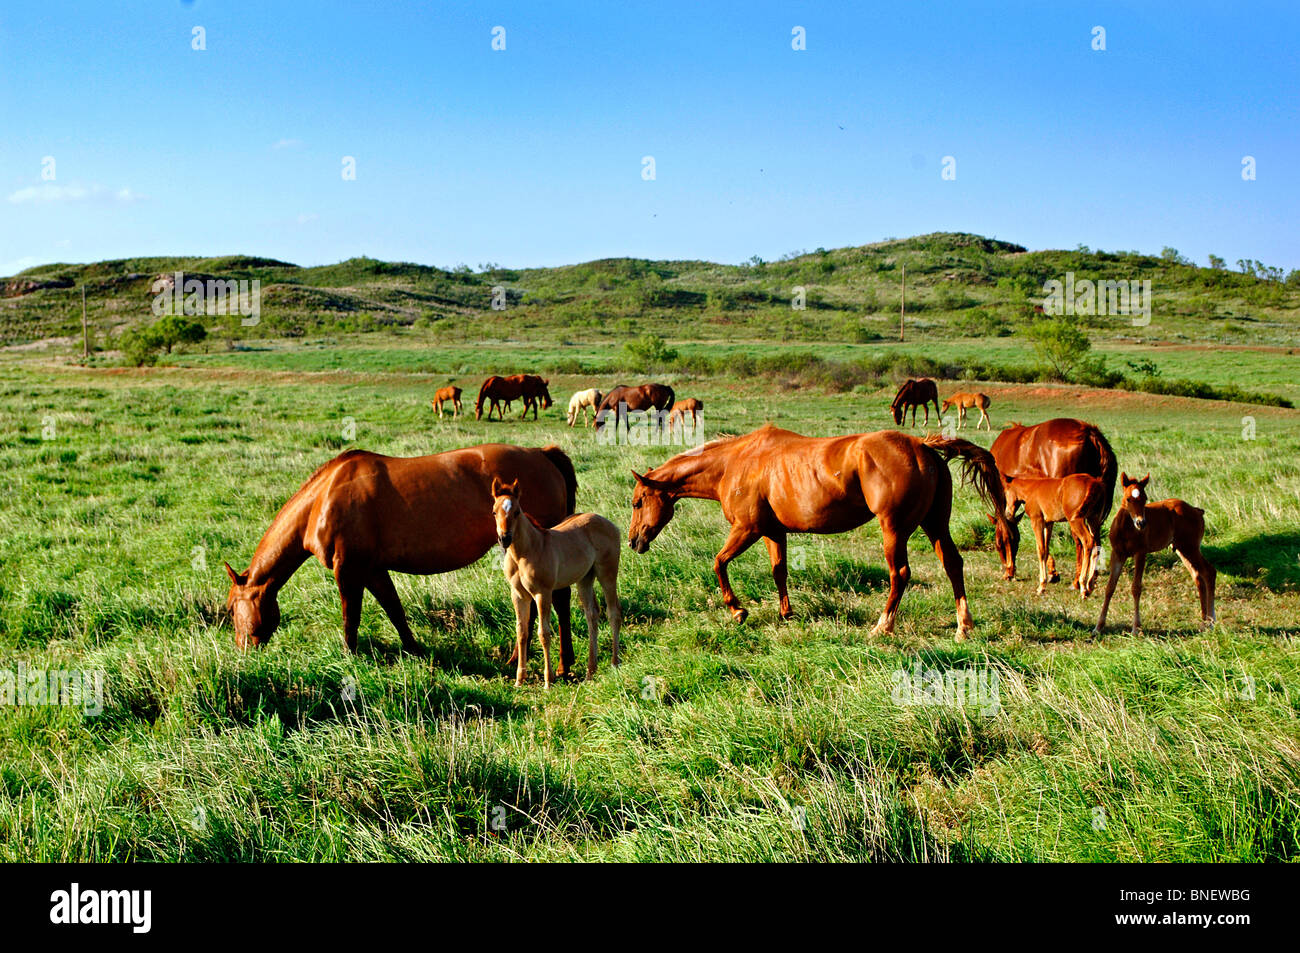 US heartland includes, farmscapes, ranch land, dusty roads, grass lands, cattle, horses, red clay, red dirt and desolate areas Stock Photo